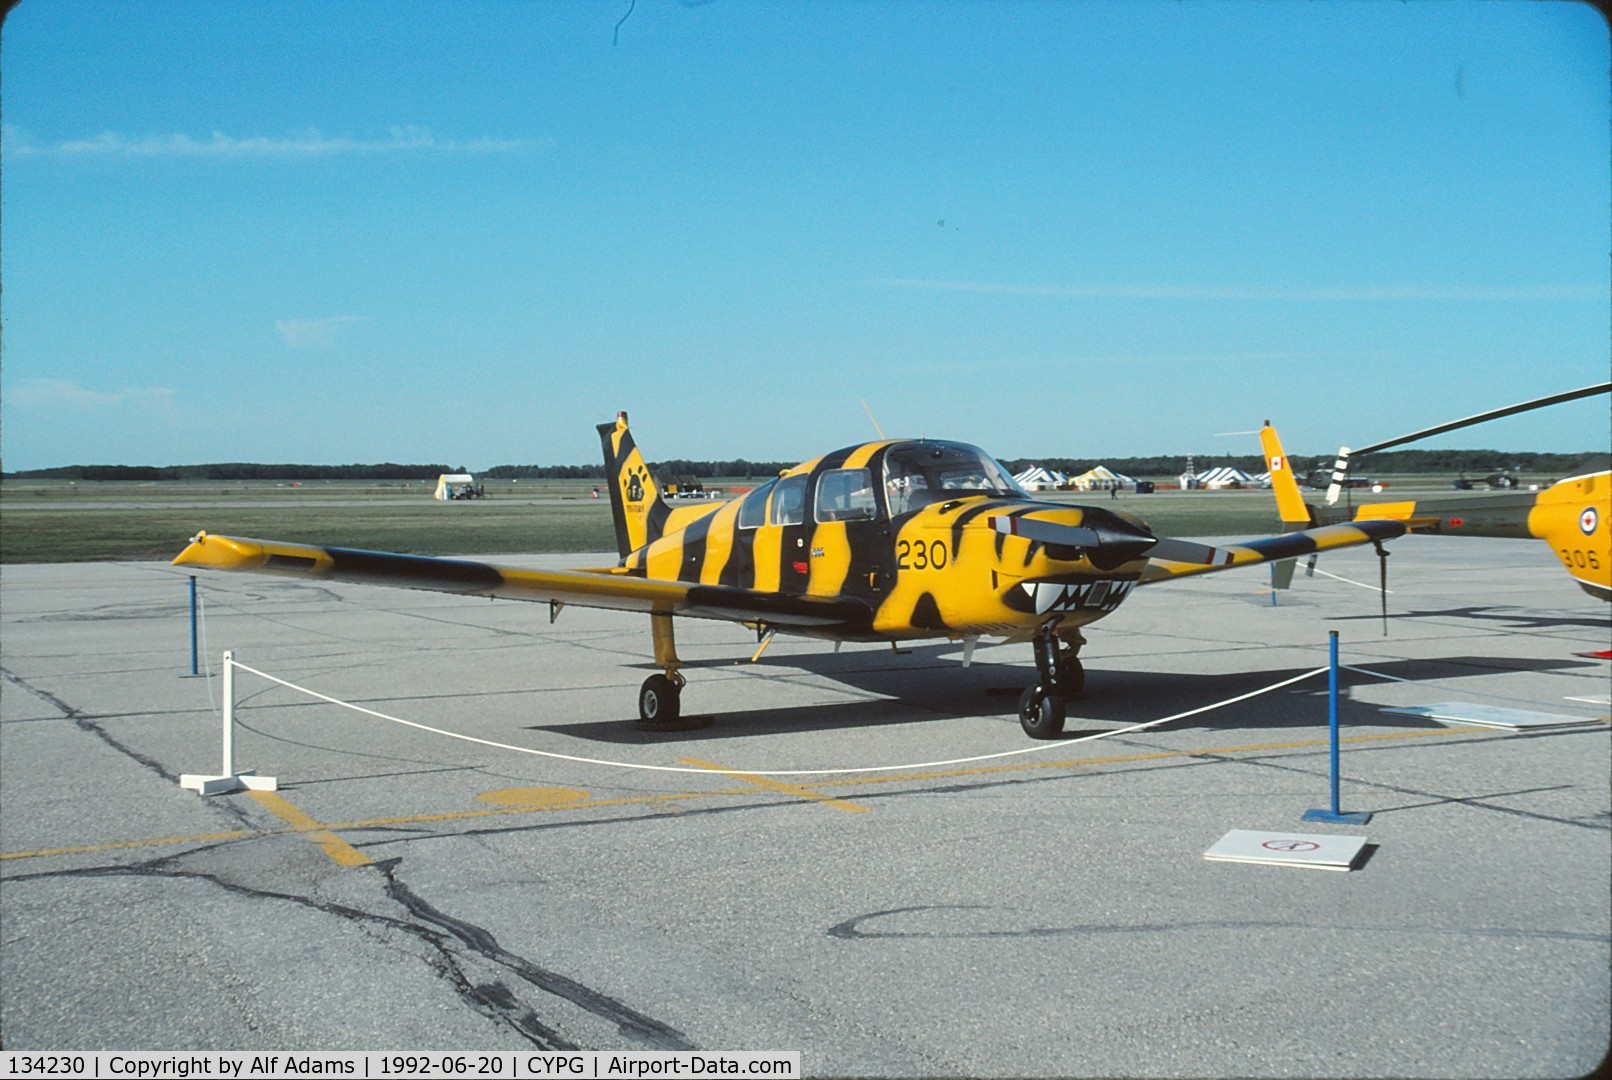 134230, Beech CT-134 Musketeer C/N M-2317, Displayed at the airshow at Canadian Forces Base Portage la Prairie, Manitoba, Canada in 1992.